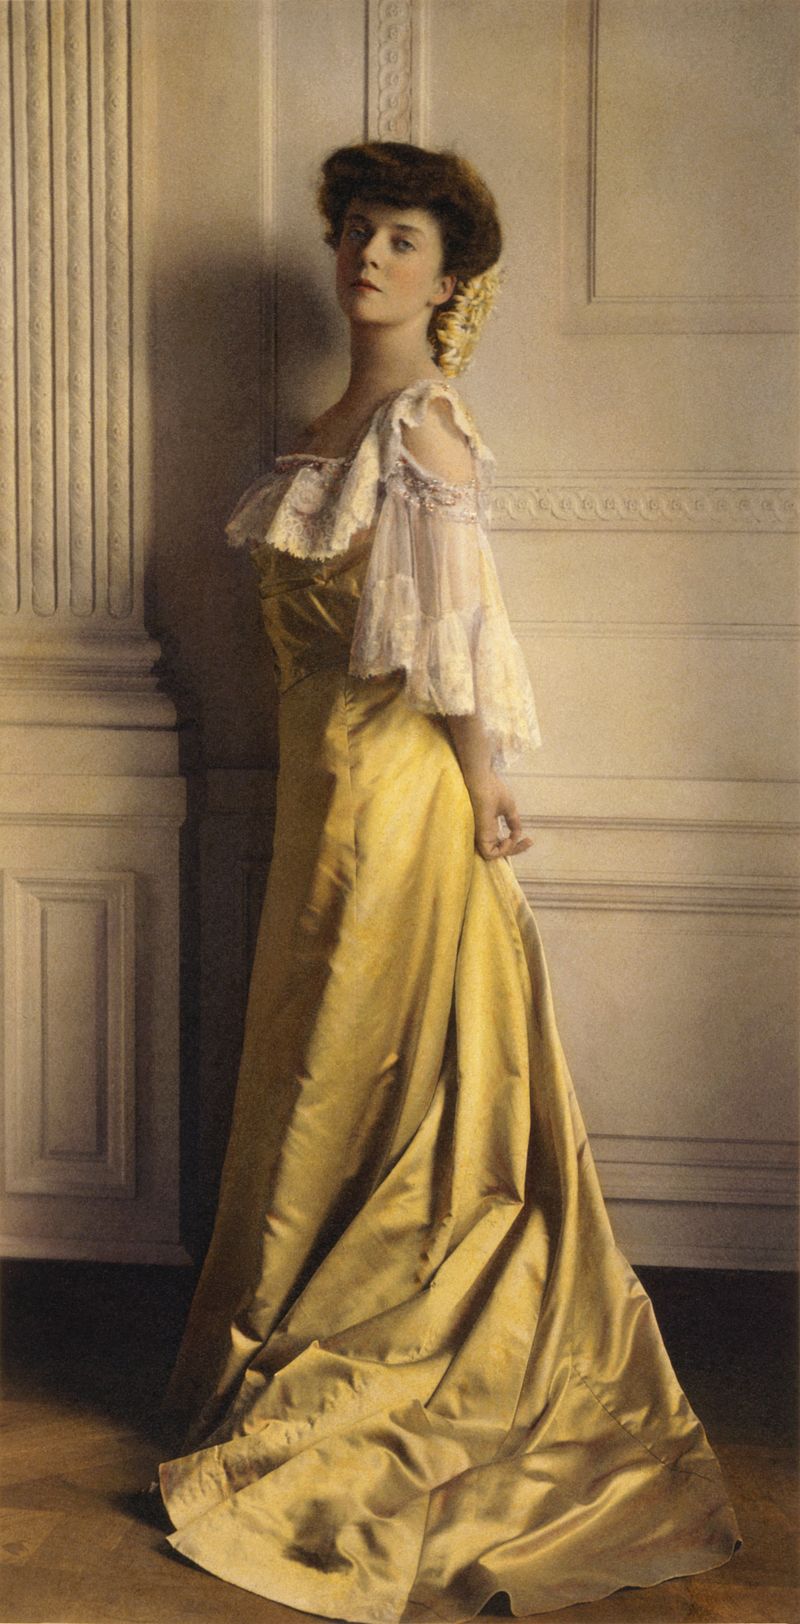 Hand-tinted photograph of Alice Roosevelt, taken 1903. A striking beauty, her outspokenness and antics won the hearts of the America people who nicknamed her "Princess Alice." Library of Congress.